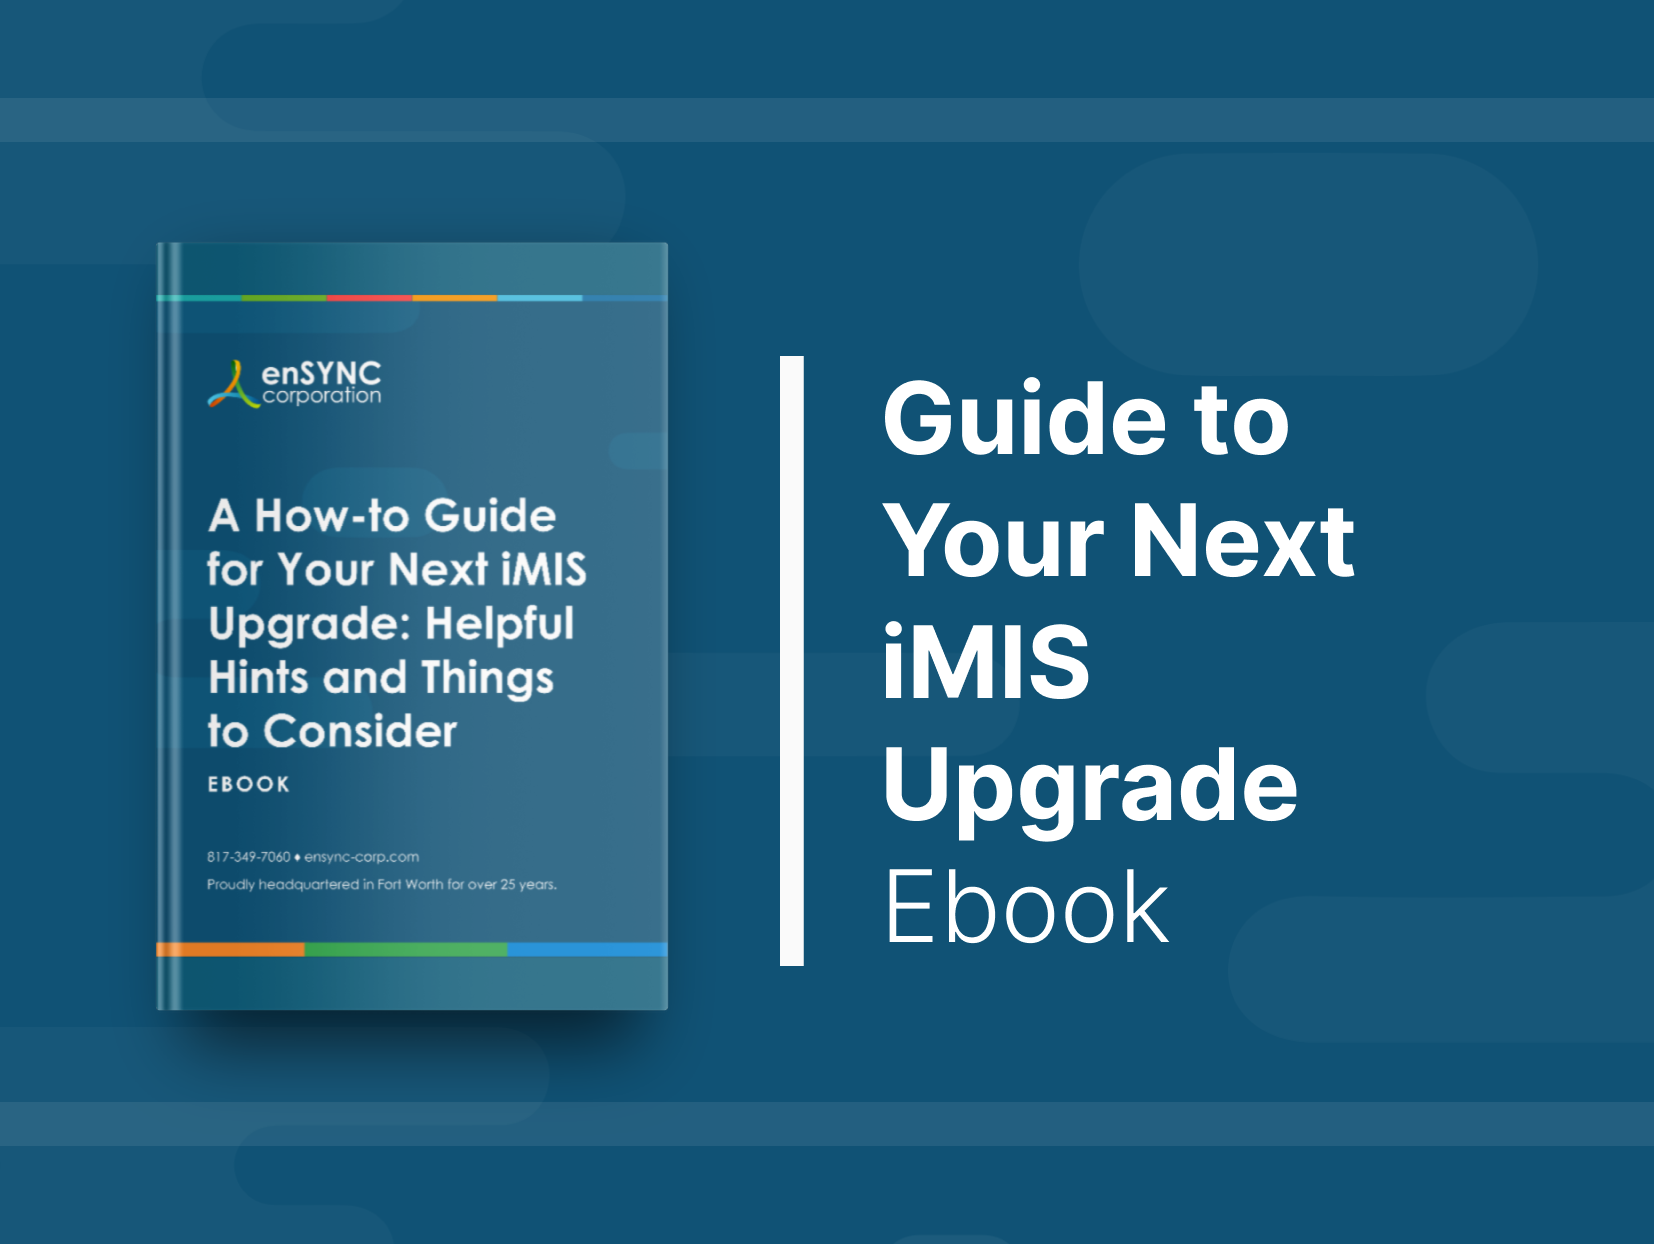 Listing Image - Guide to Your Next iMIS Upgrade Ebook